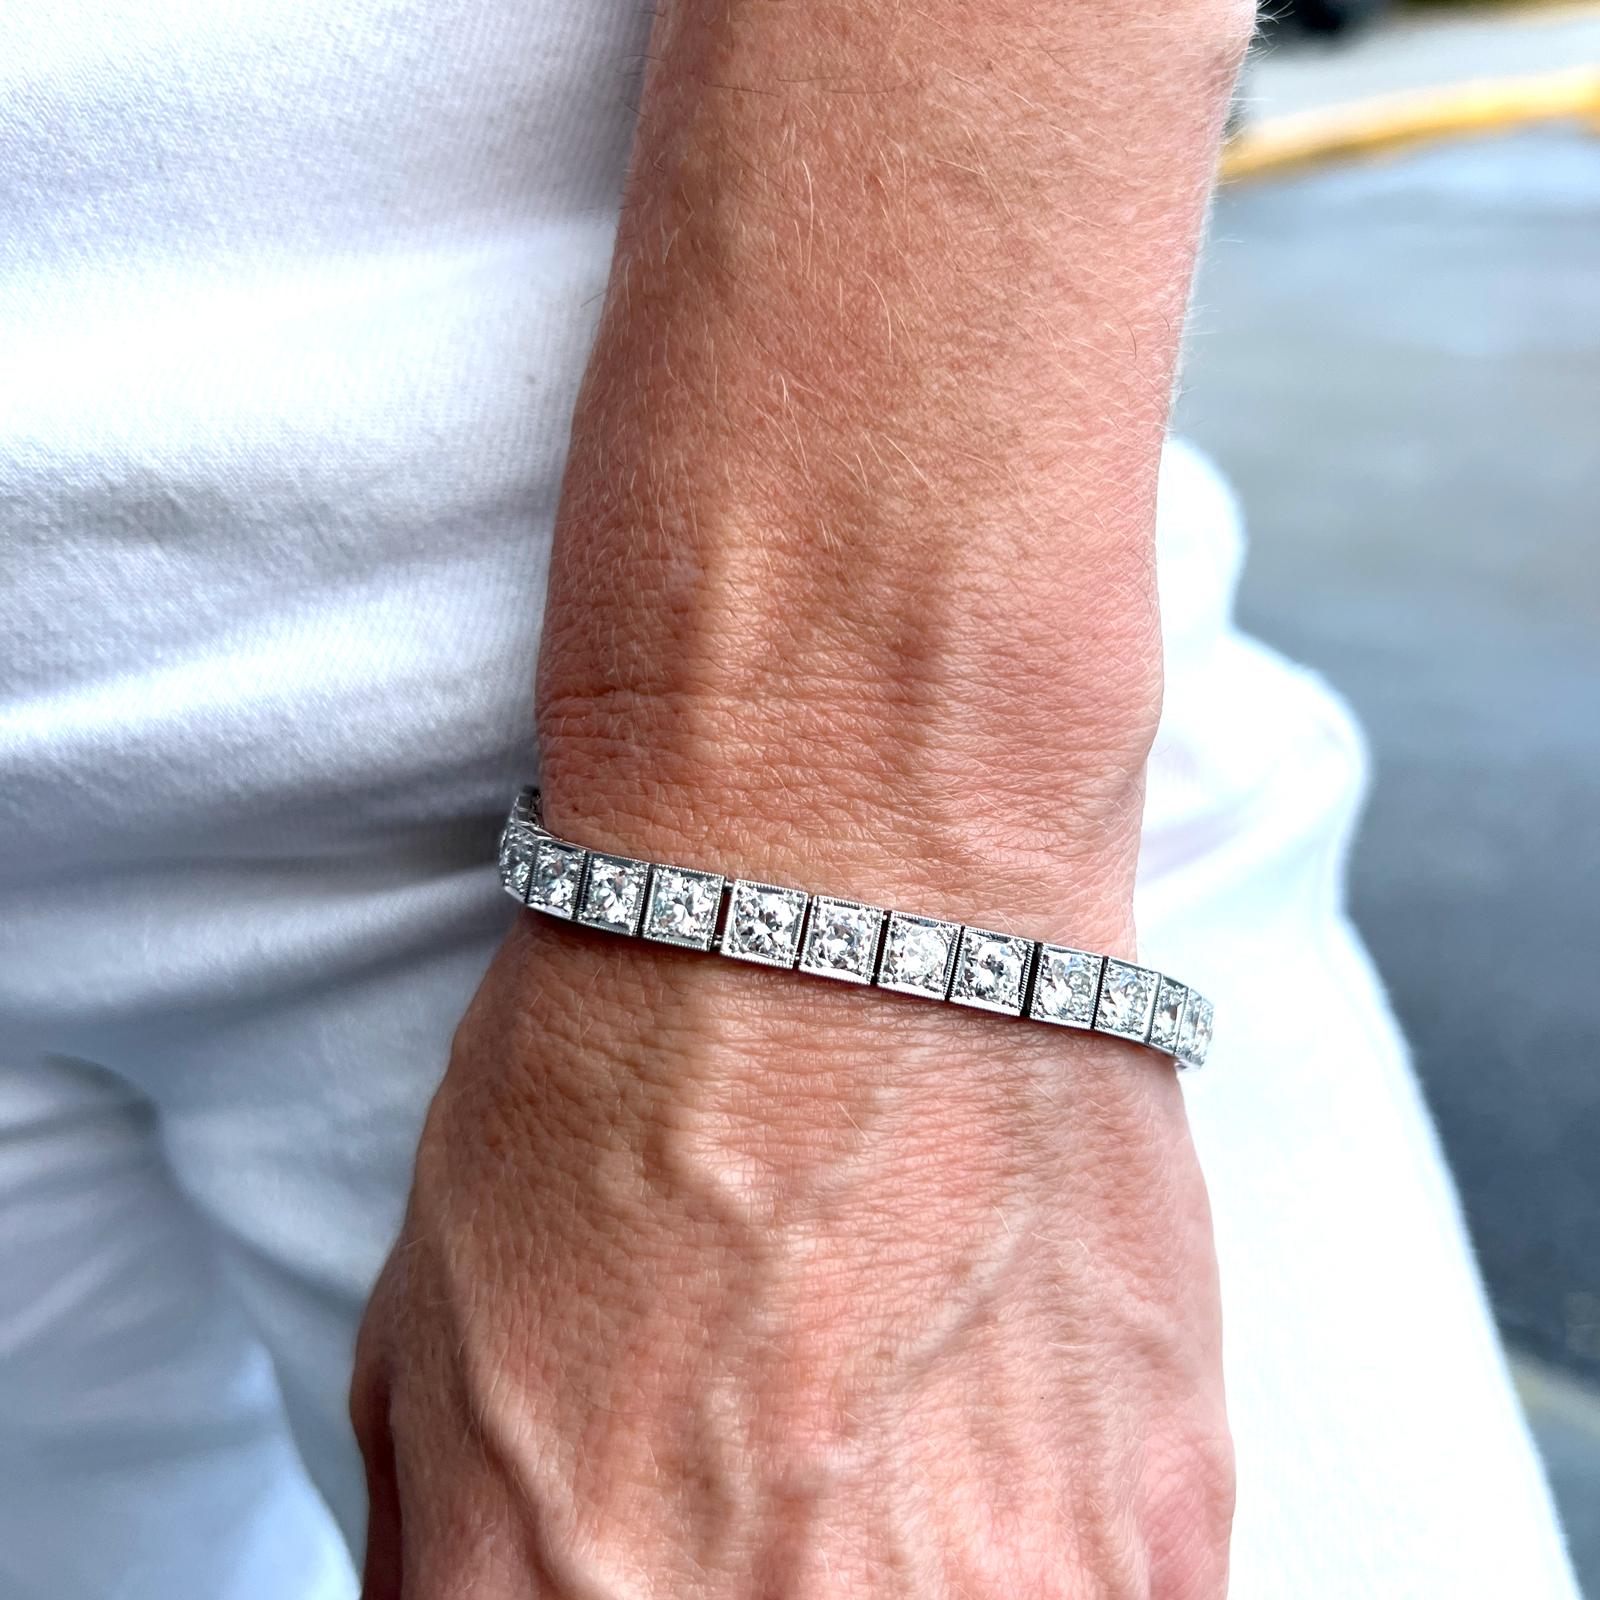 Timeless original diamond line bracelet crafted in platinum. The bracelet features 29 round brilliant cut diamonds weighing approximately 9.50 carat total weight (approximately .33 carat/diamond). The diamonds are graded G-H color and VS2-SI1